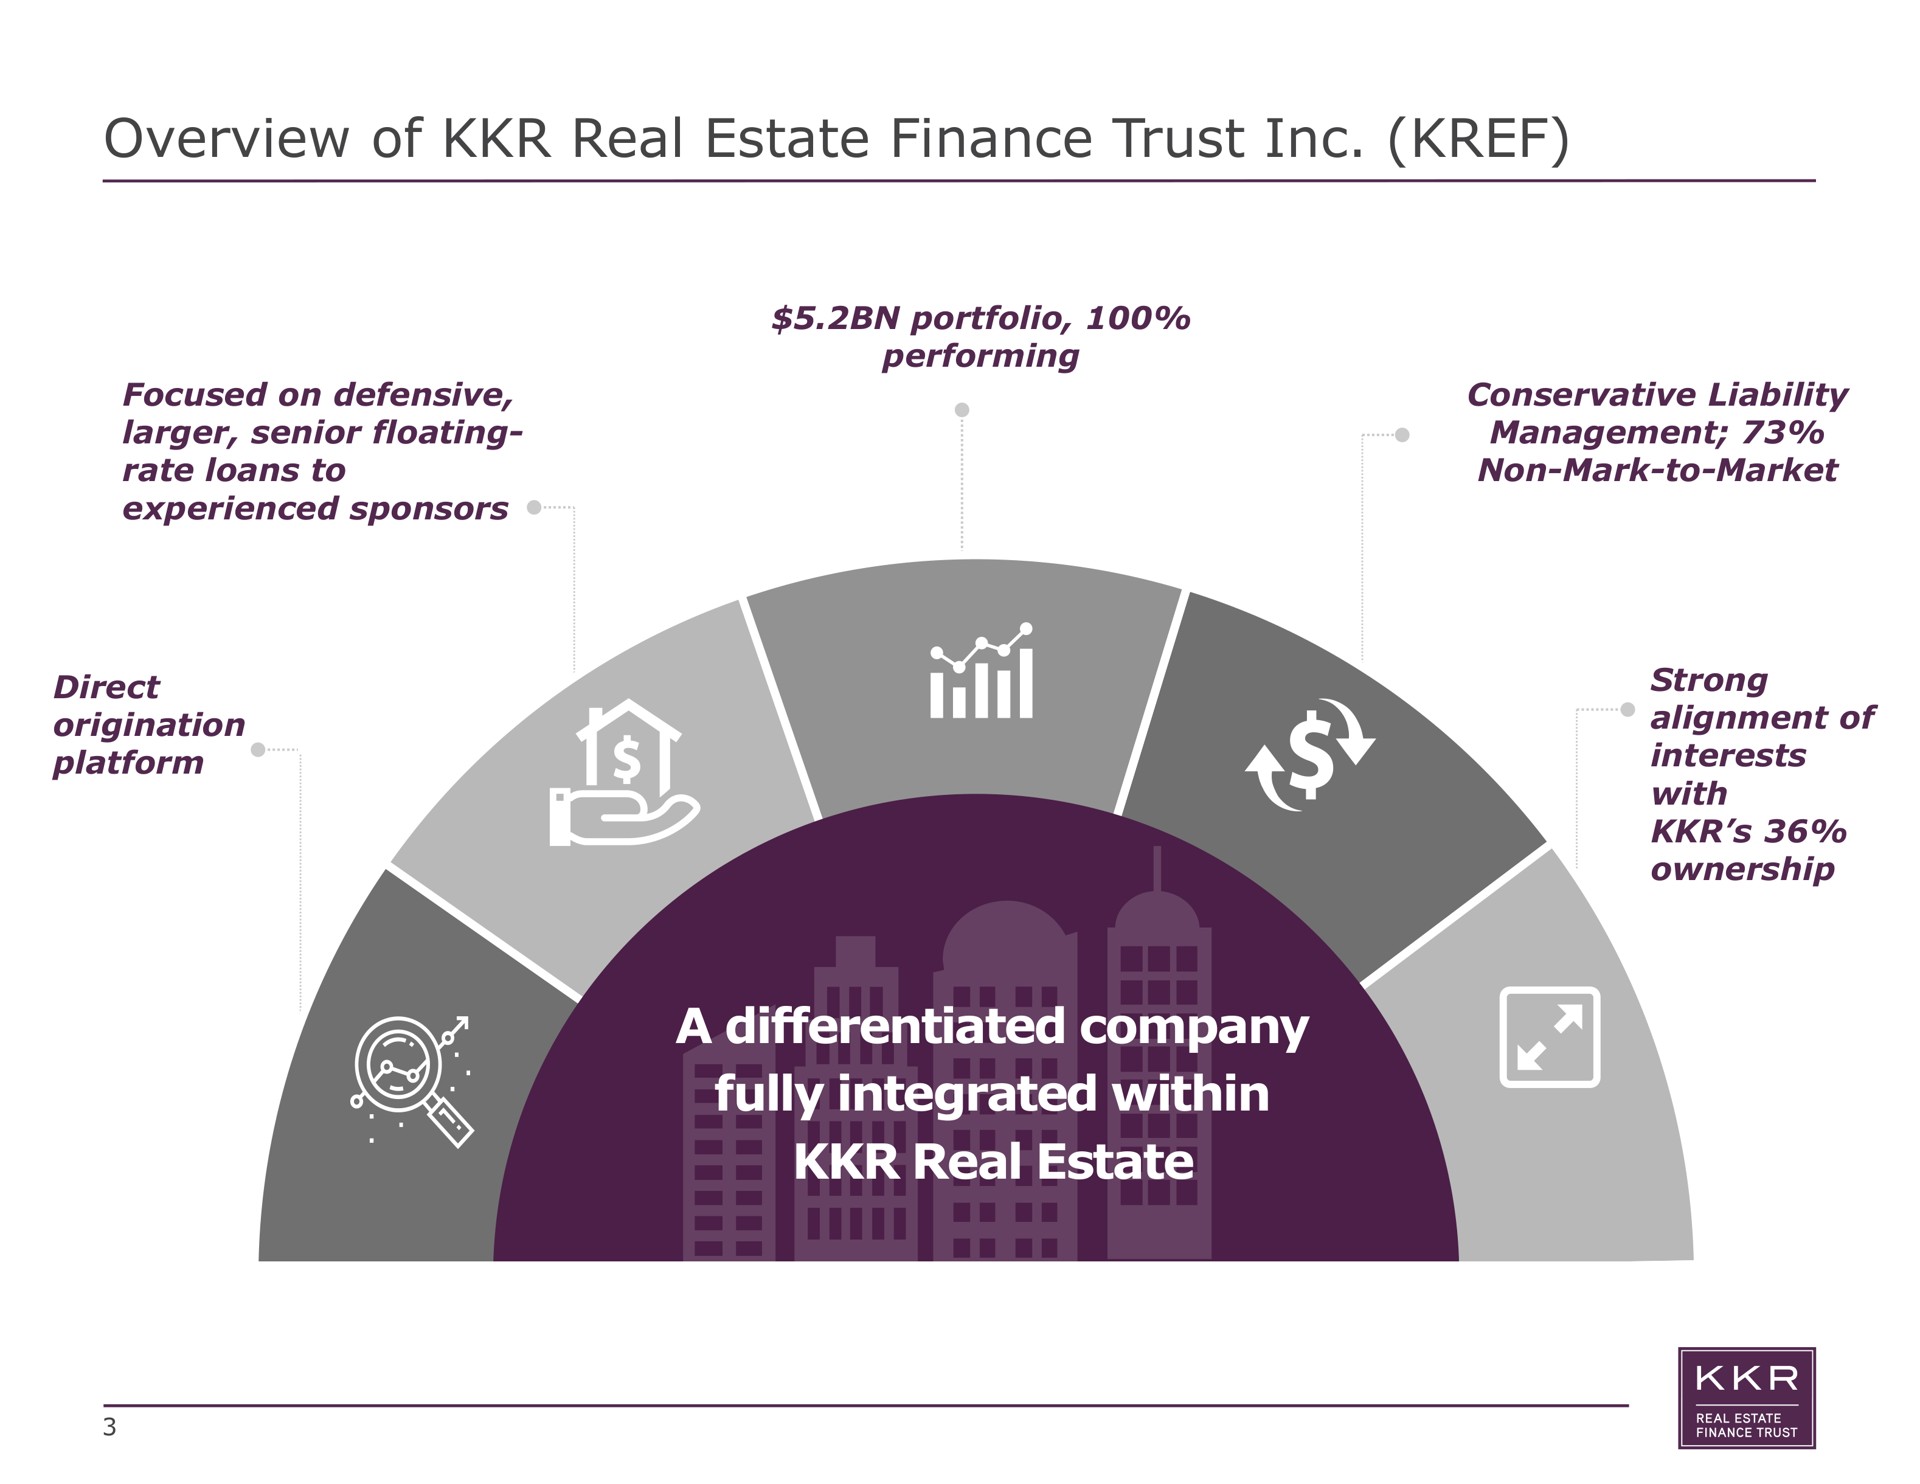 overview of real estate finance trust portfolio performing conservative liability management non mark to market strong alignment of interests with ownership a differentiated company fully integrated within real estate focused on defensive senior floating rate loans to experienced sponsors direct origination platform cate | KKR Real Estate Finance Trust